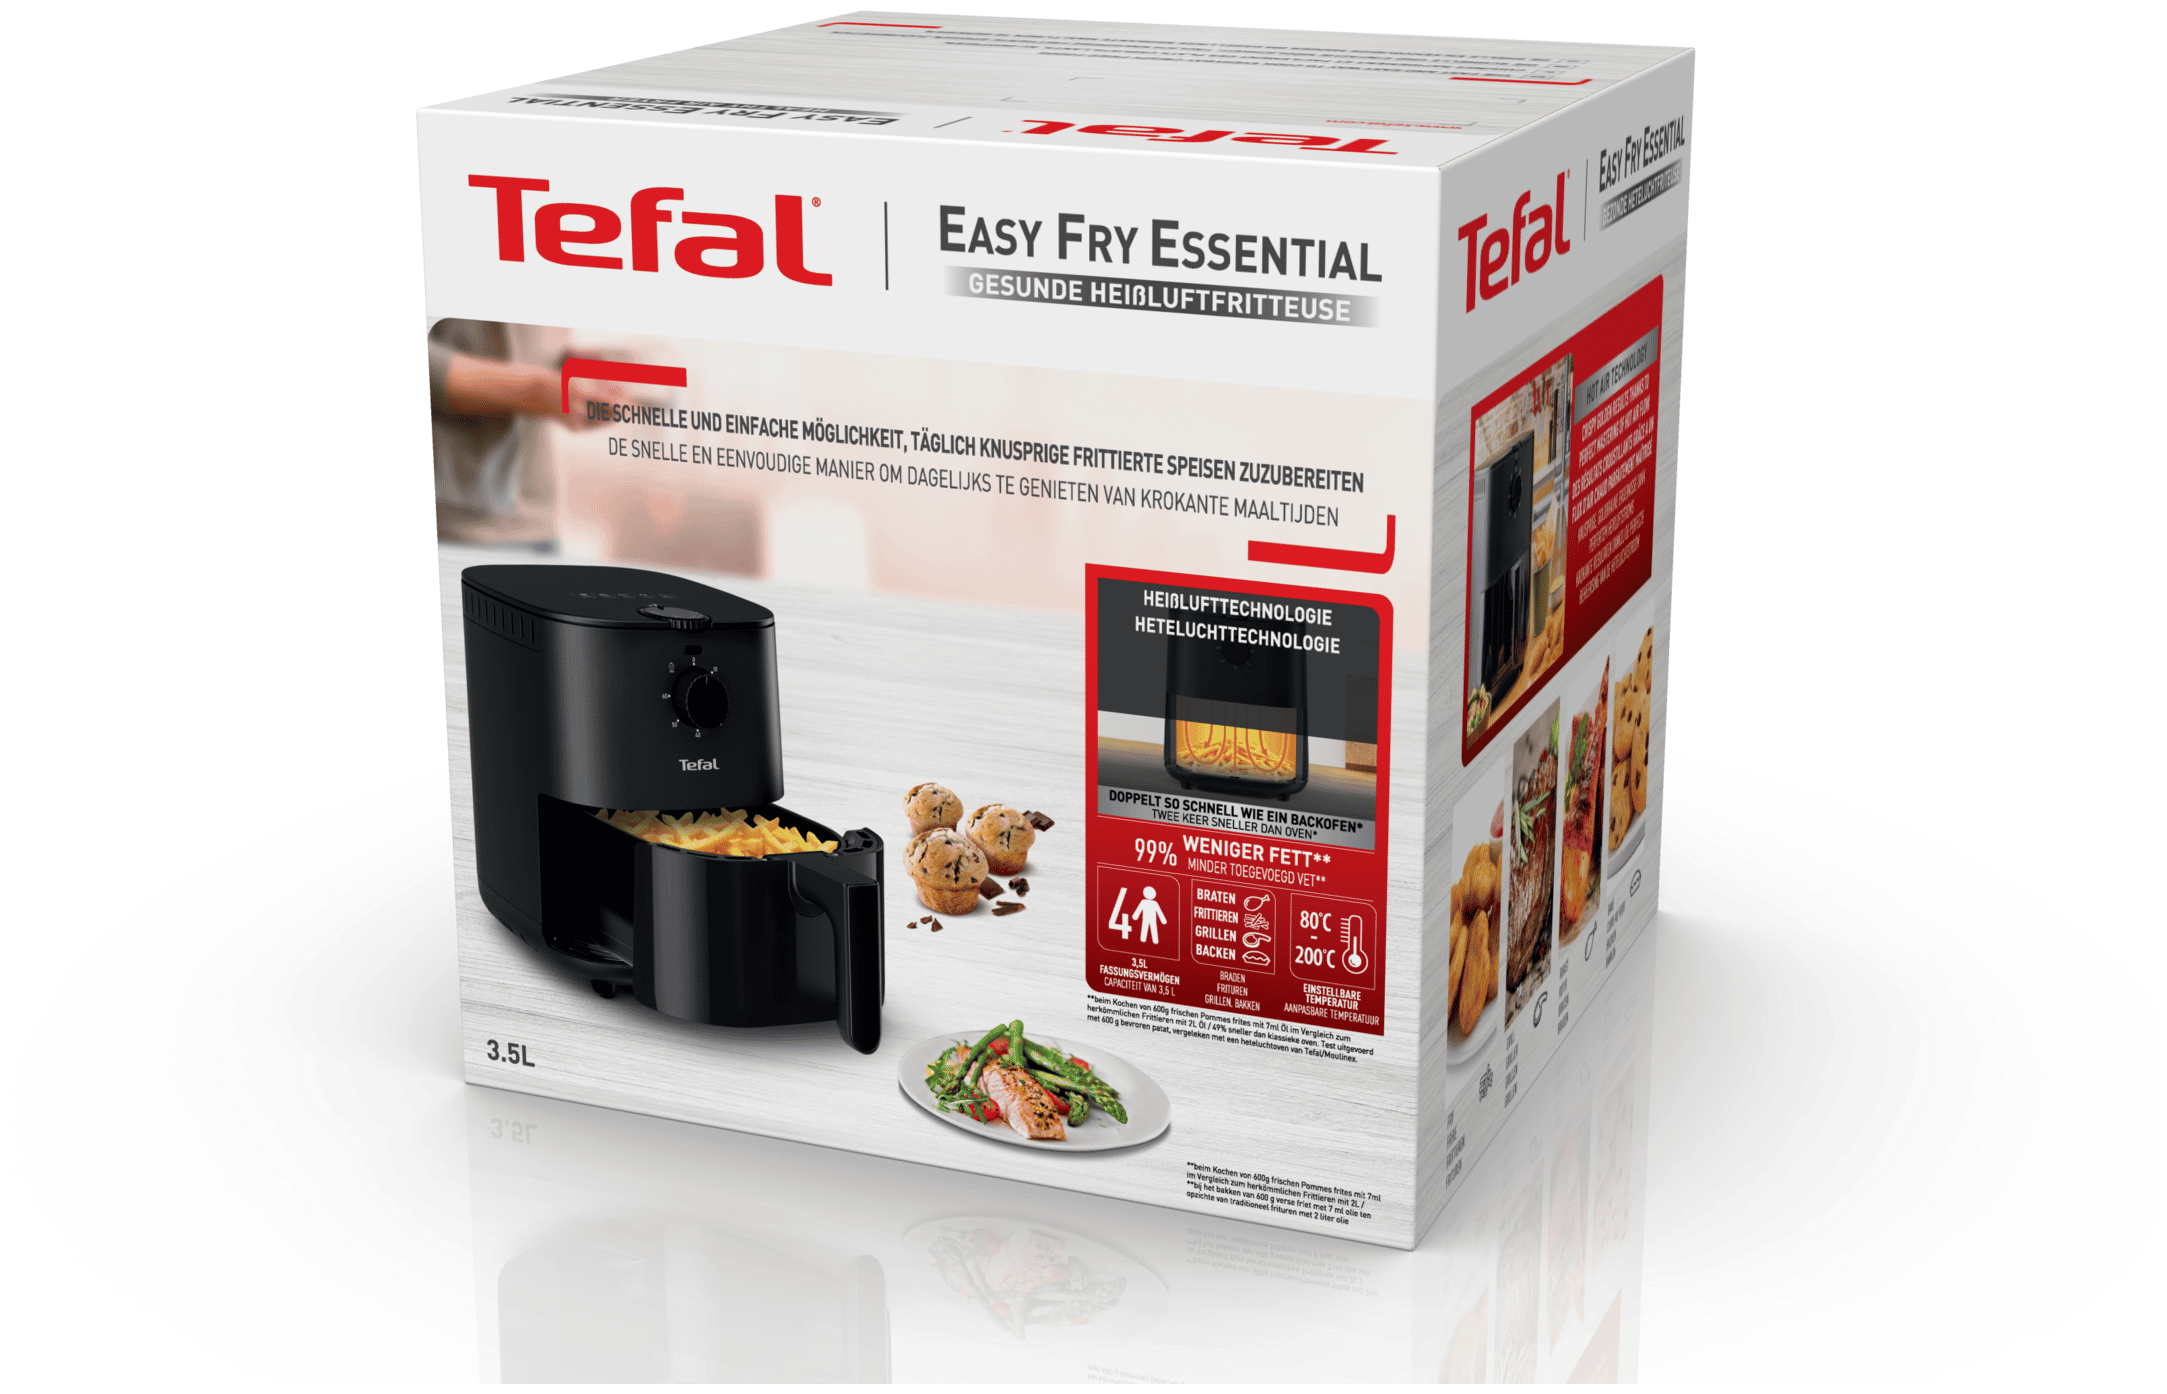 EY1308 Essential Fry Boomstore L 3,5 Easy bei Tefal